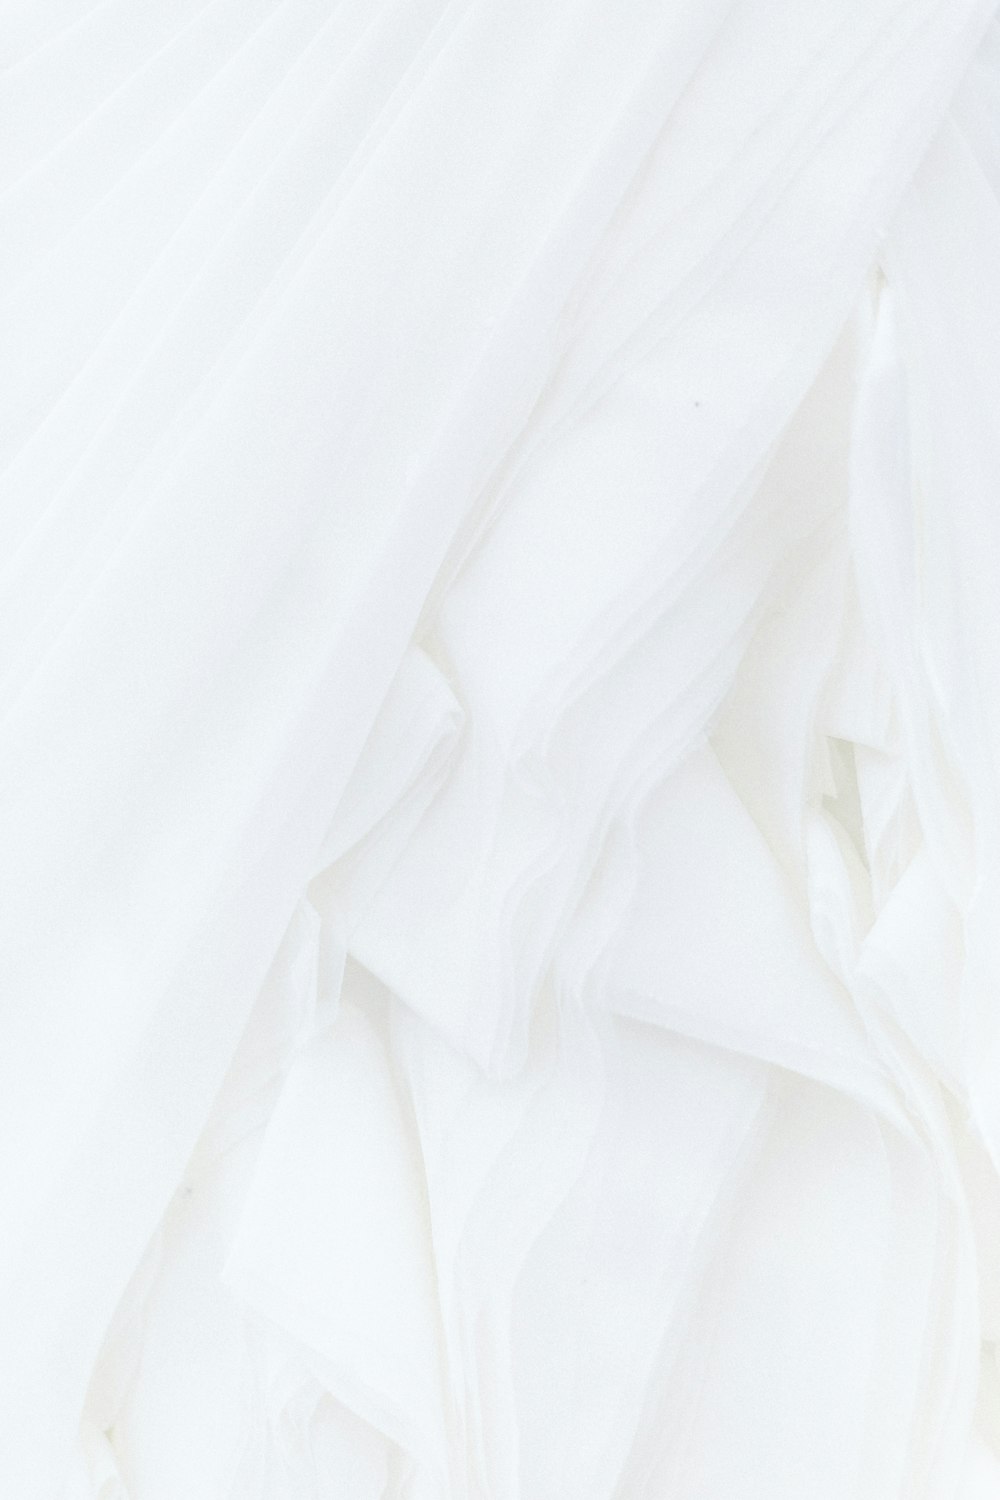 White Cloth Pictures | Download Free Images on Unsplash